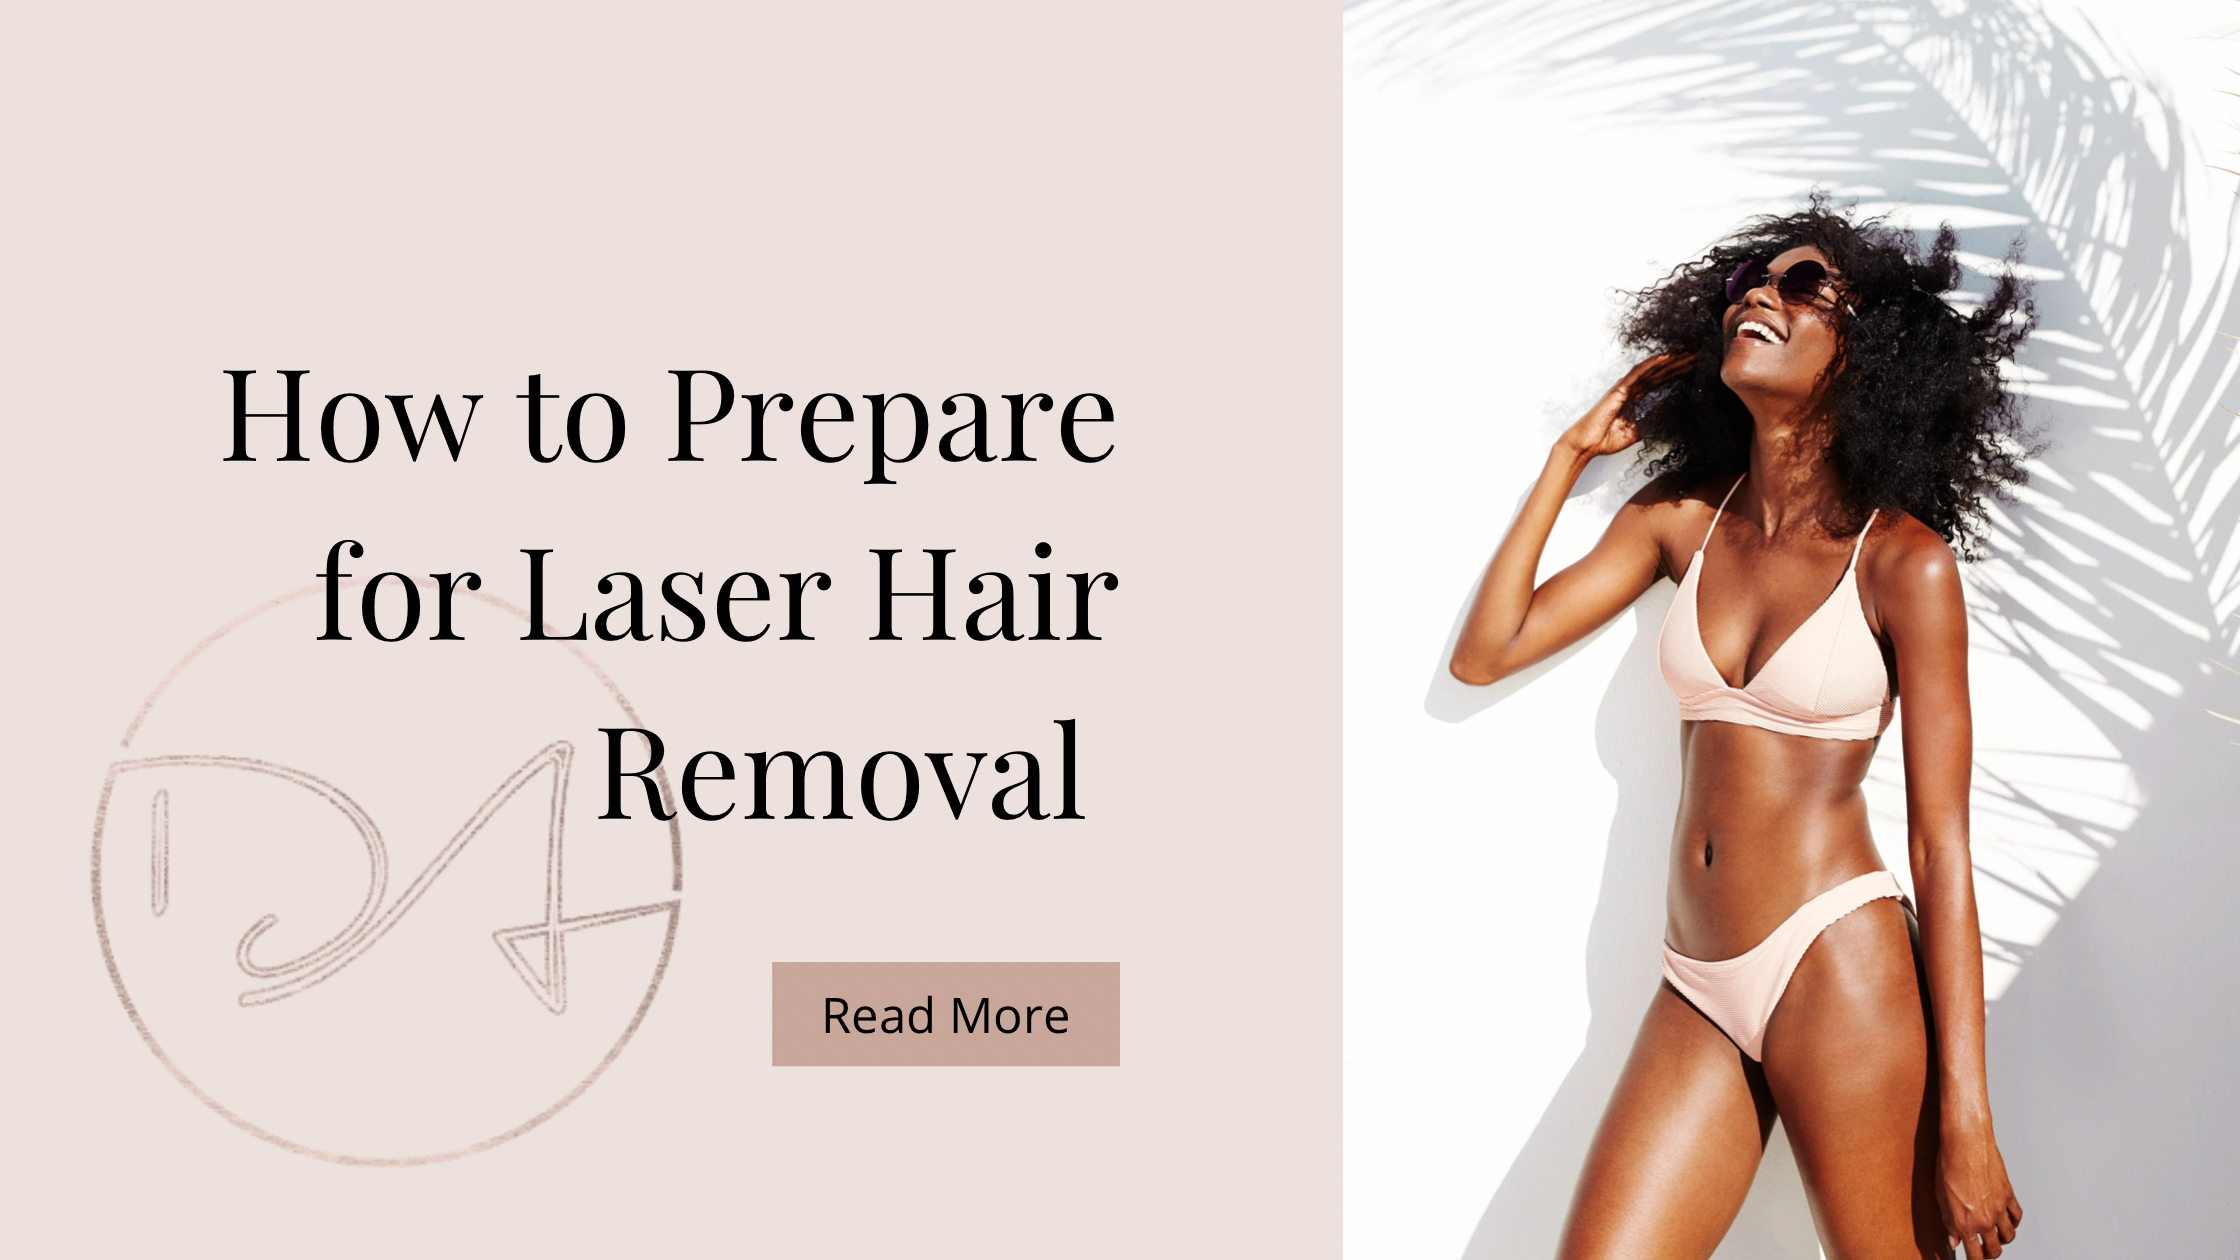 How To Prepare For Laser Hair Removal | Destination Aesthetics Medical Spa